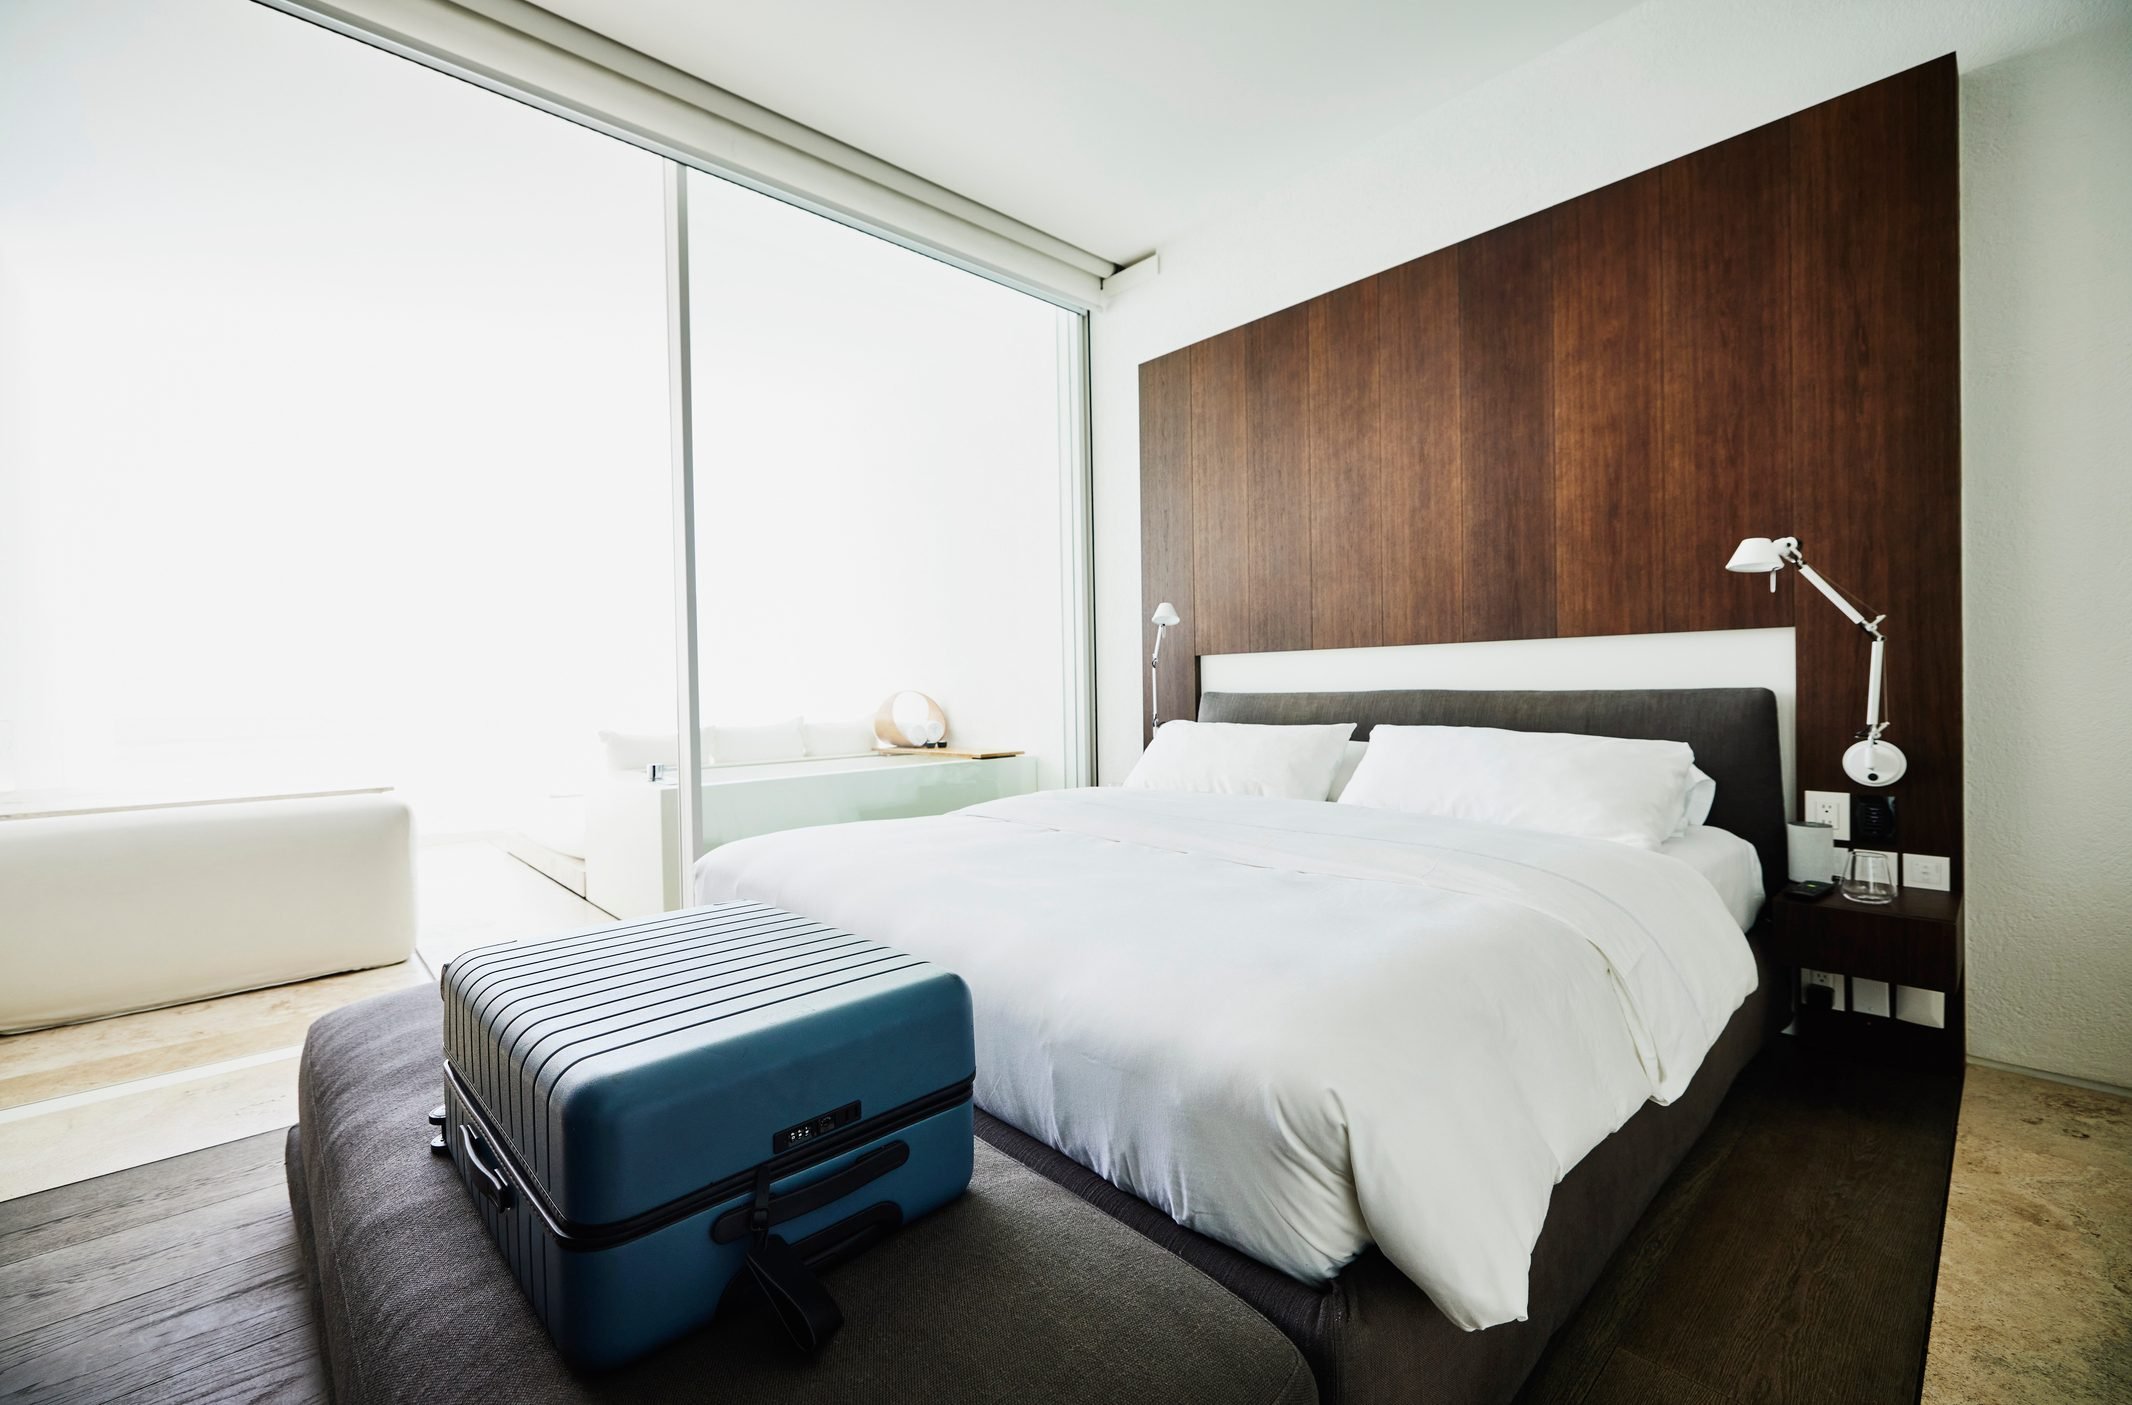 20 Things You Shouldnt Do in Your Hotel Room, According to Travel Pros